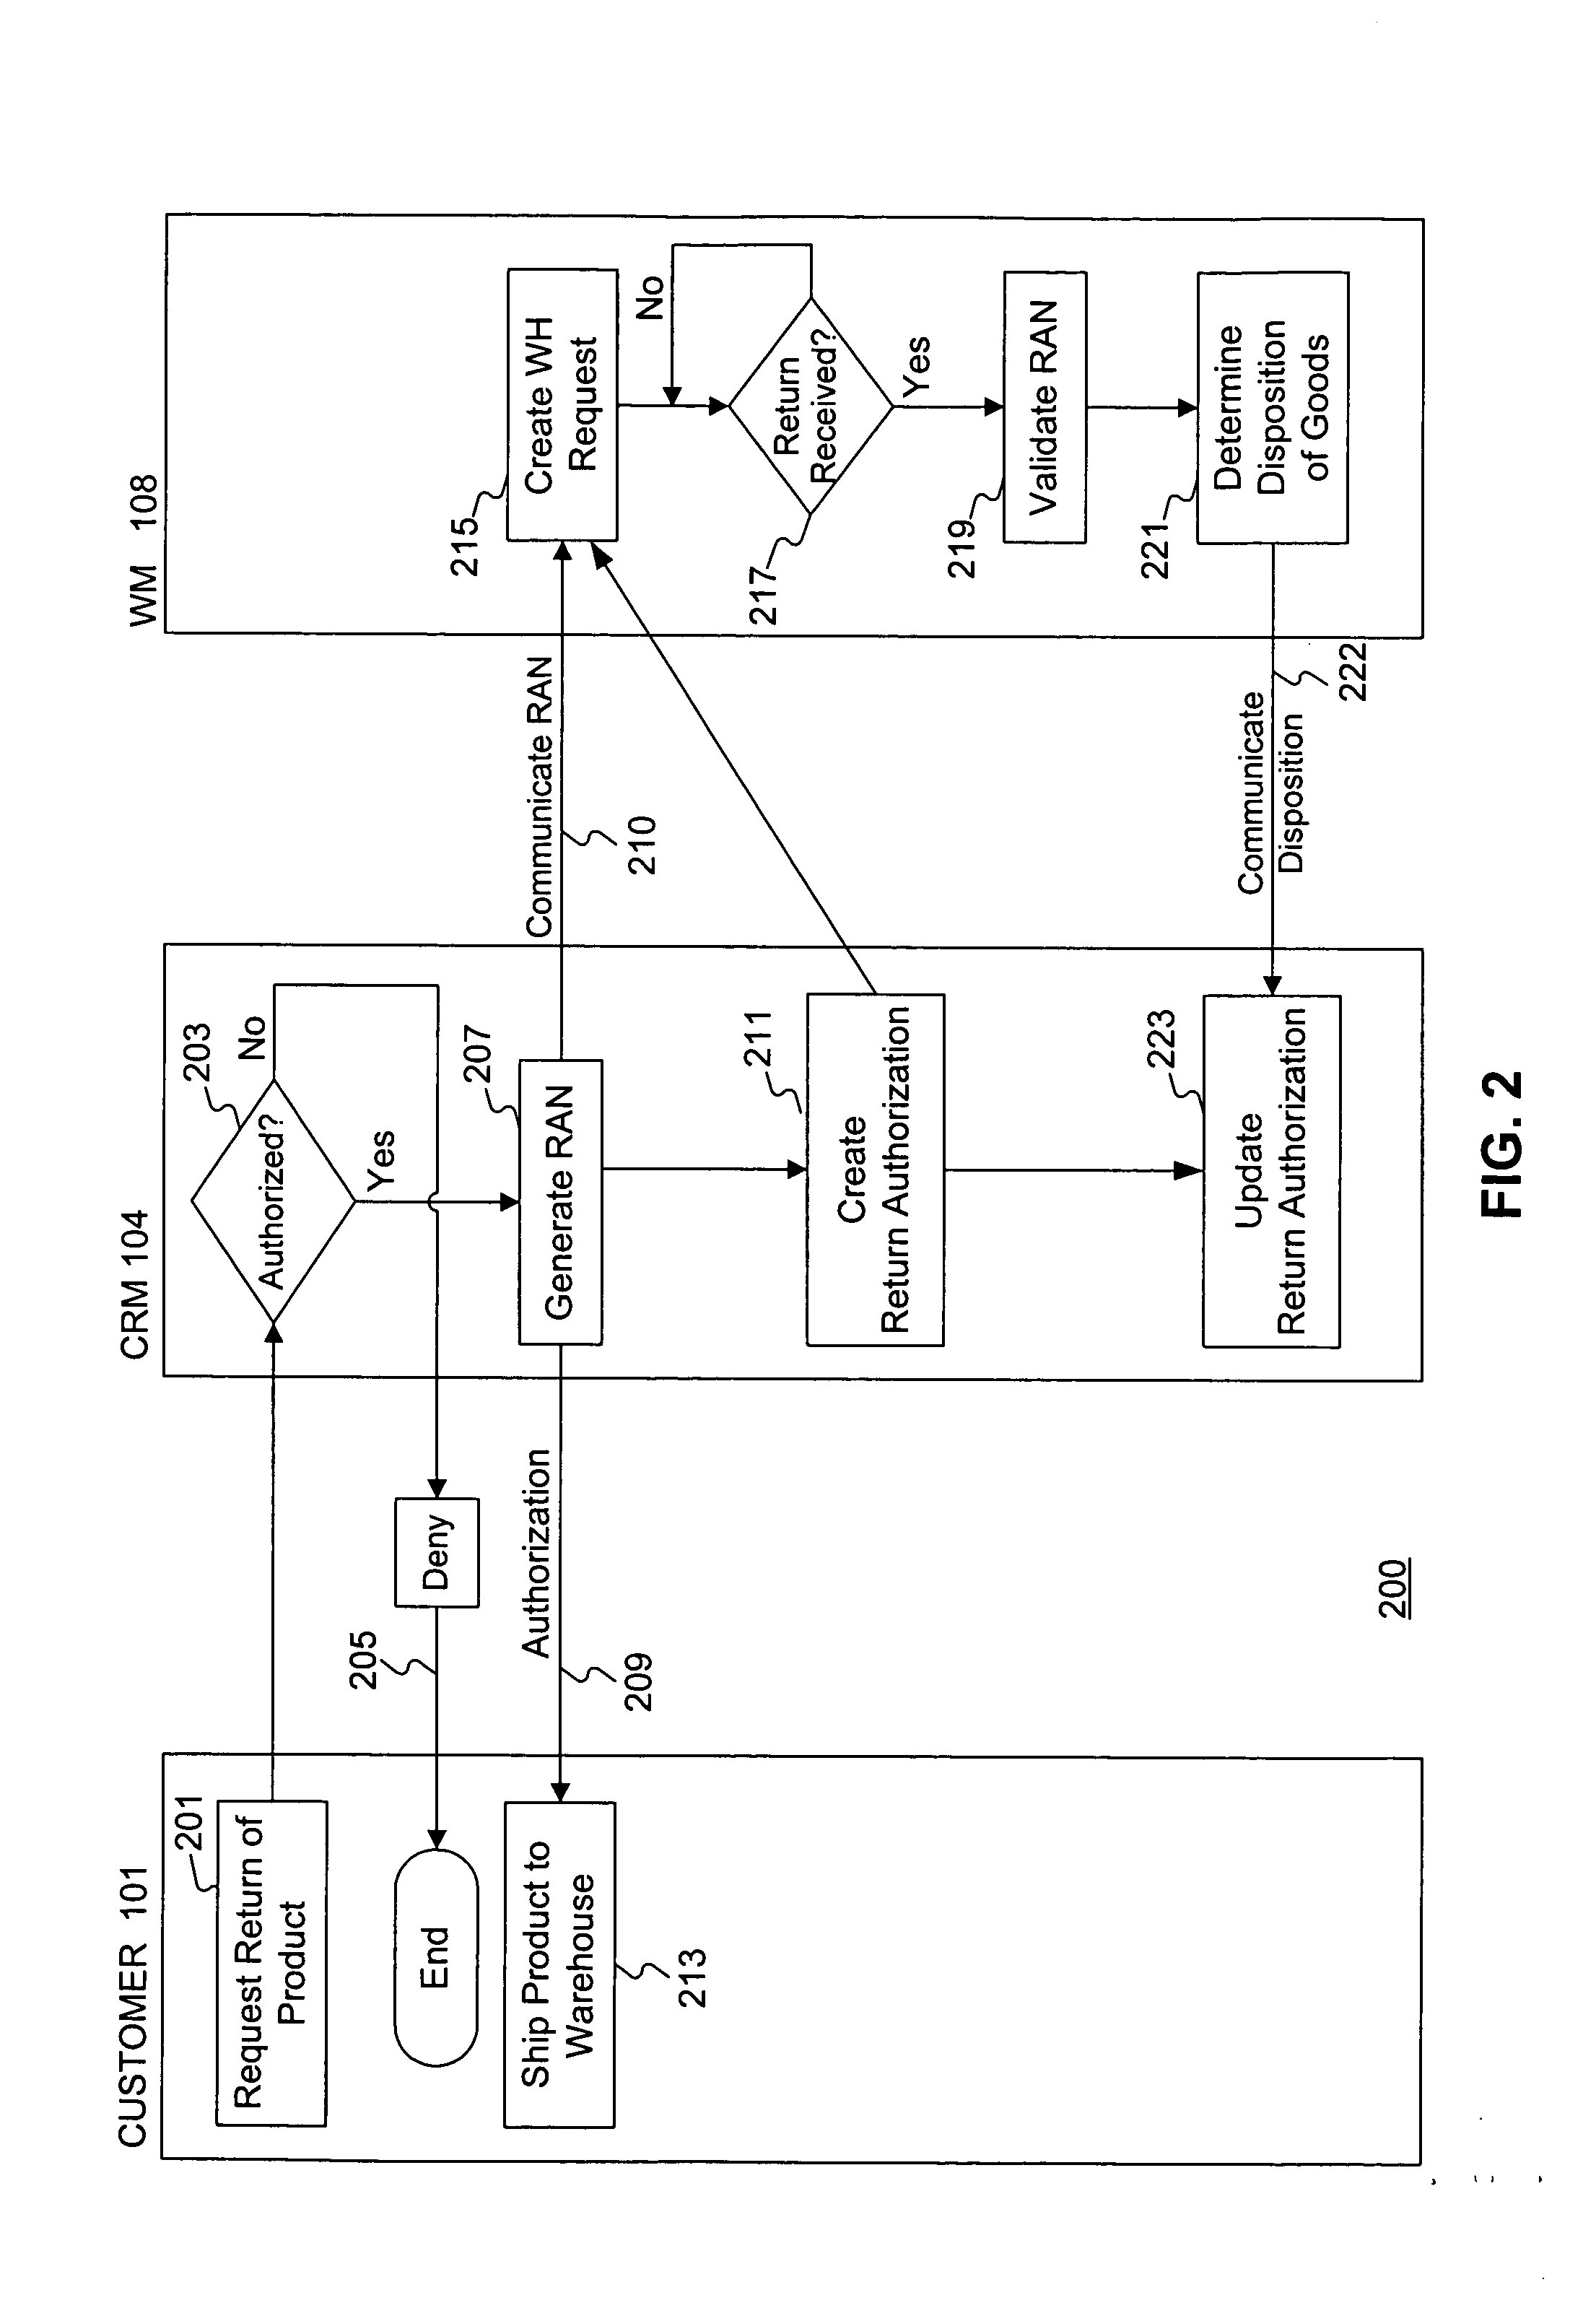 Systems and methods for managing product returns using return authorization numbers